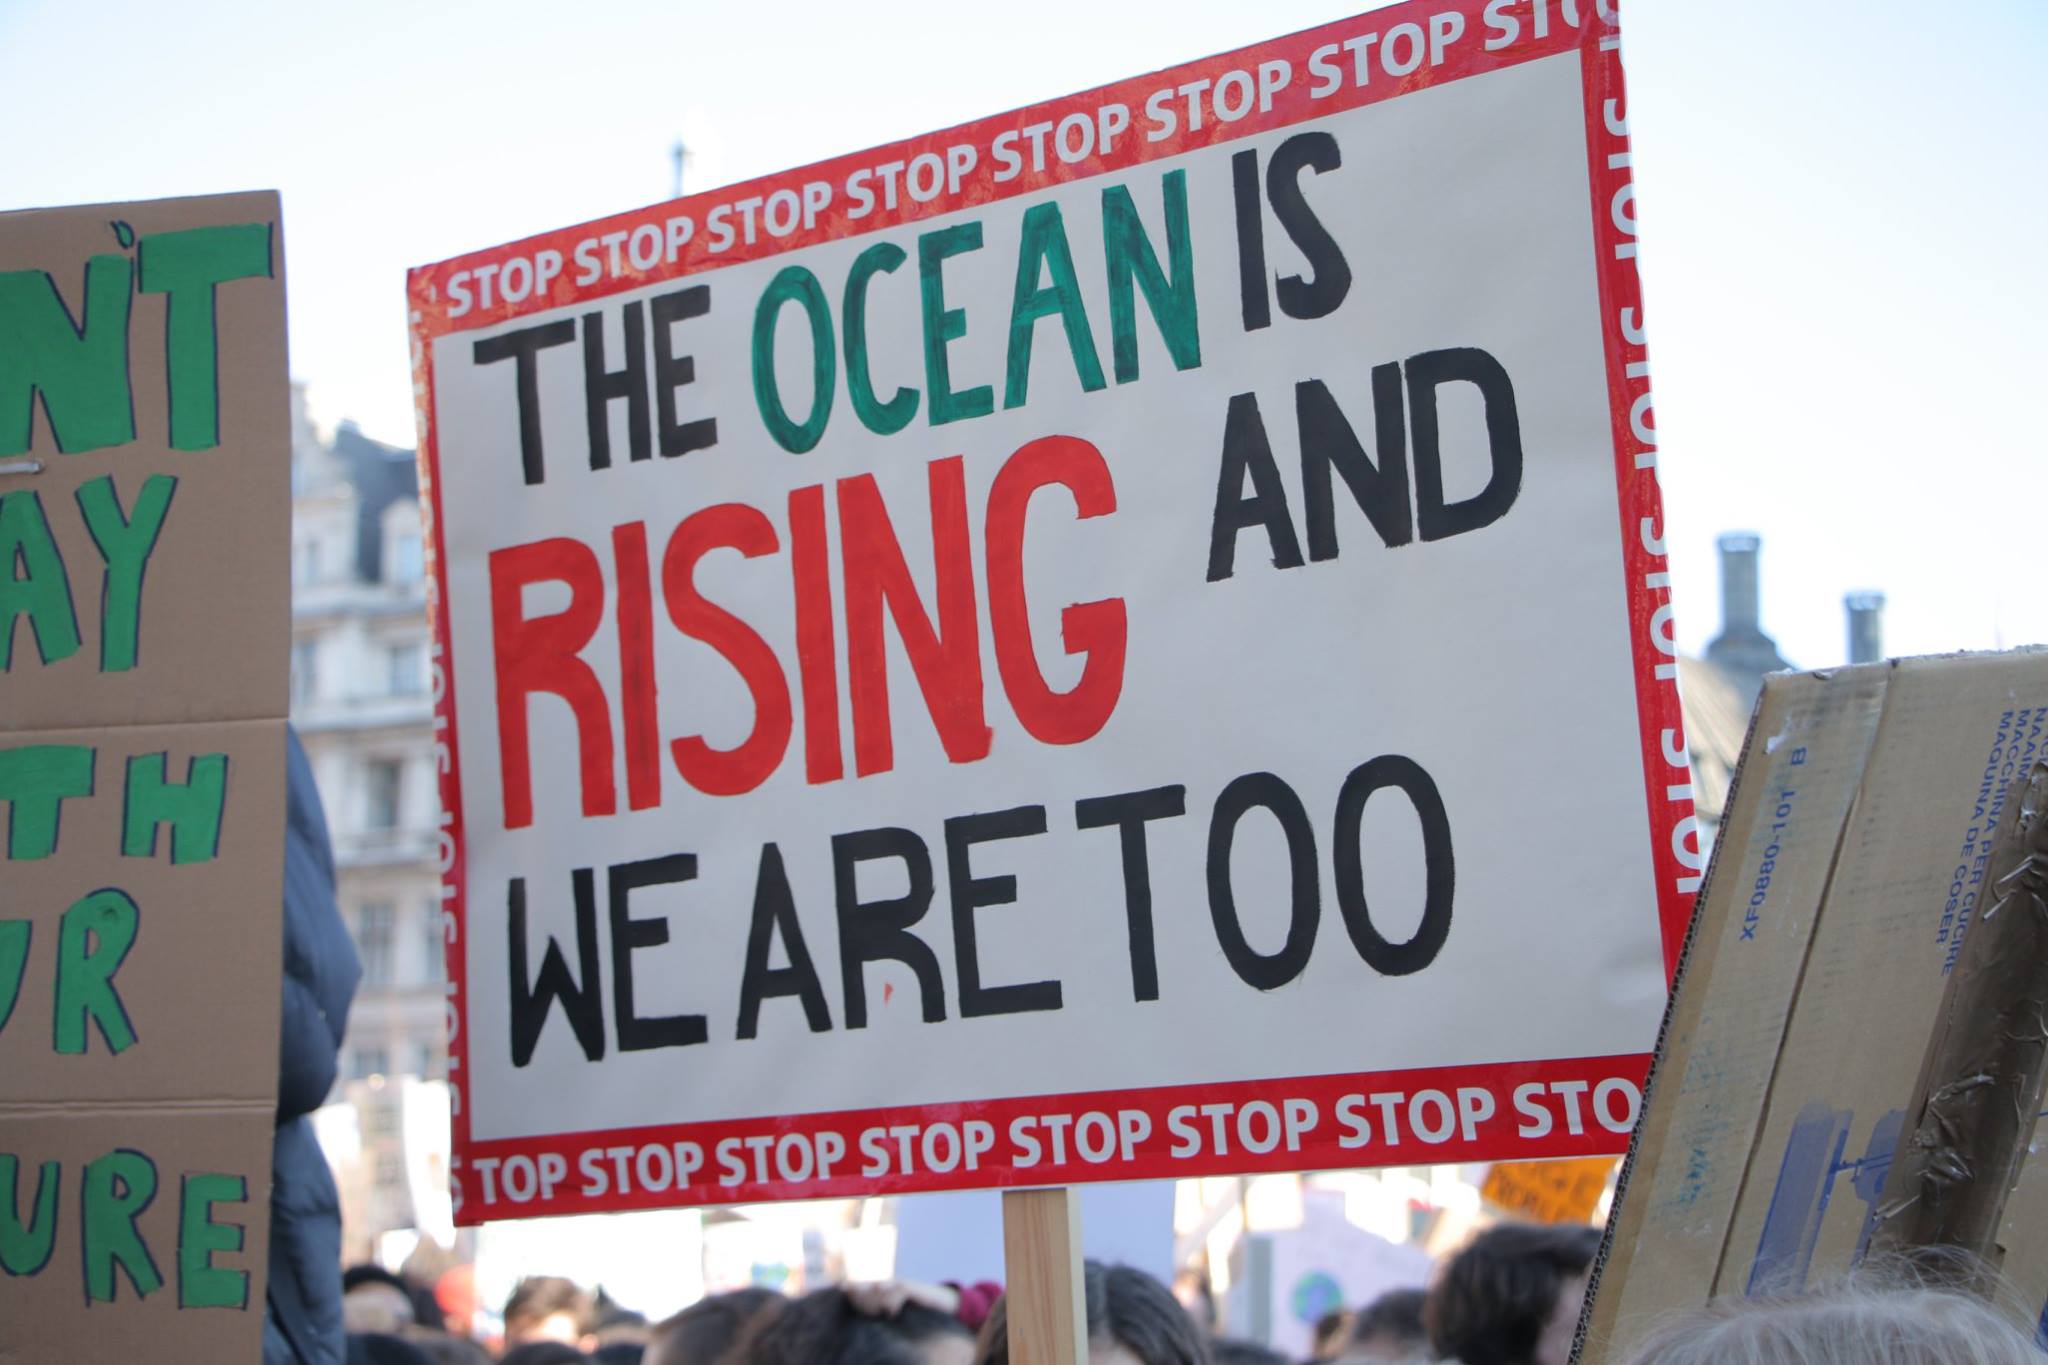 the ocean is rising and we are too